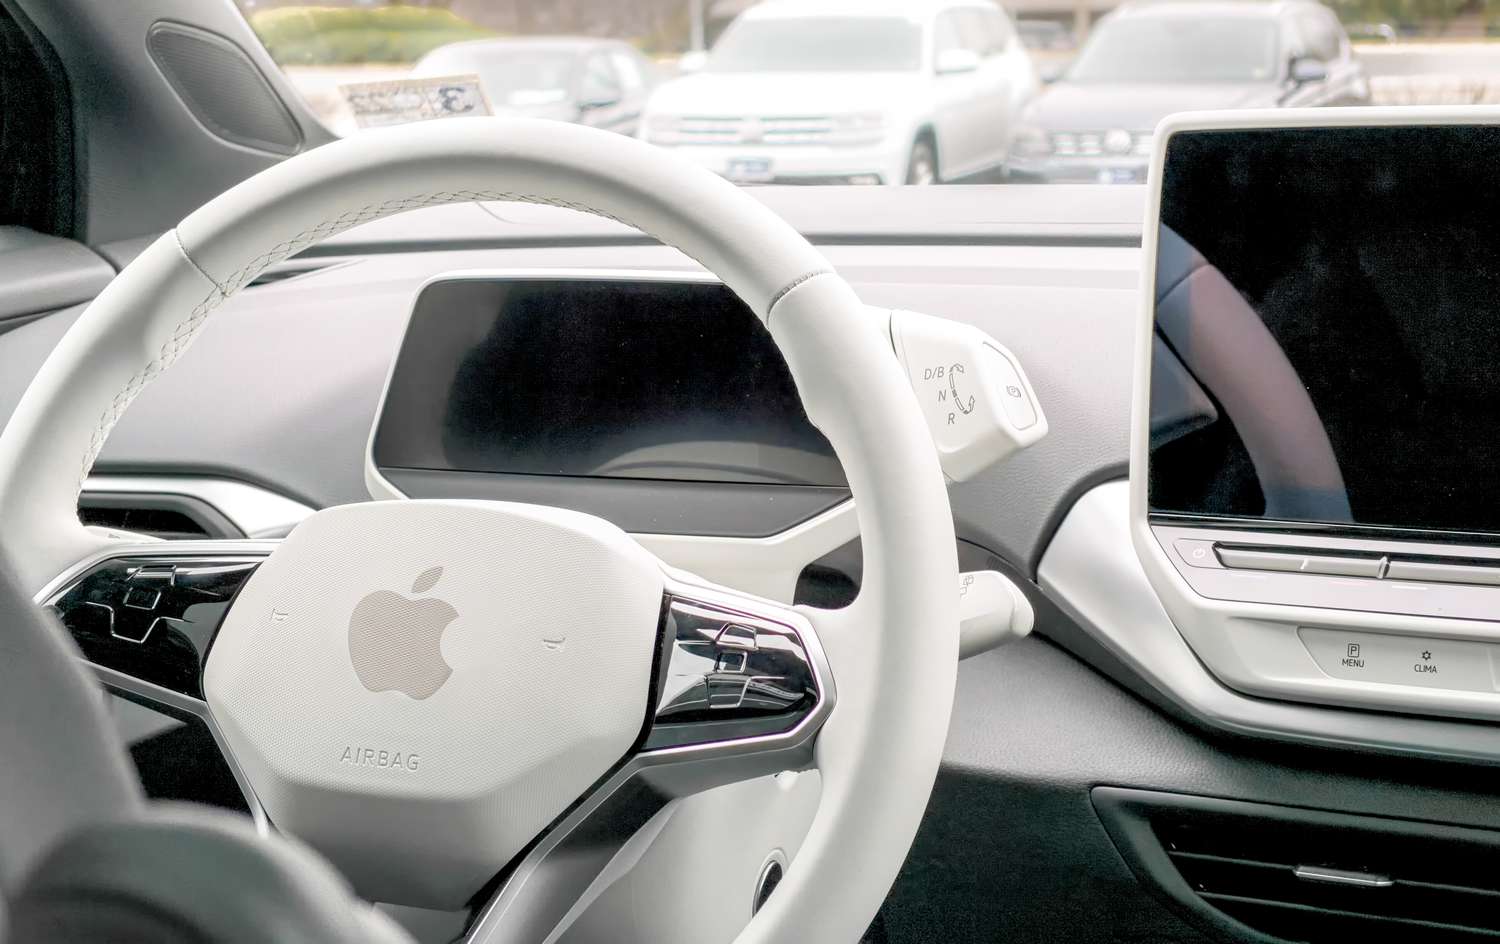 Apple reduces staff after abandoning ambitions for self-driving cars.